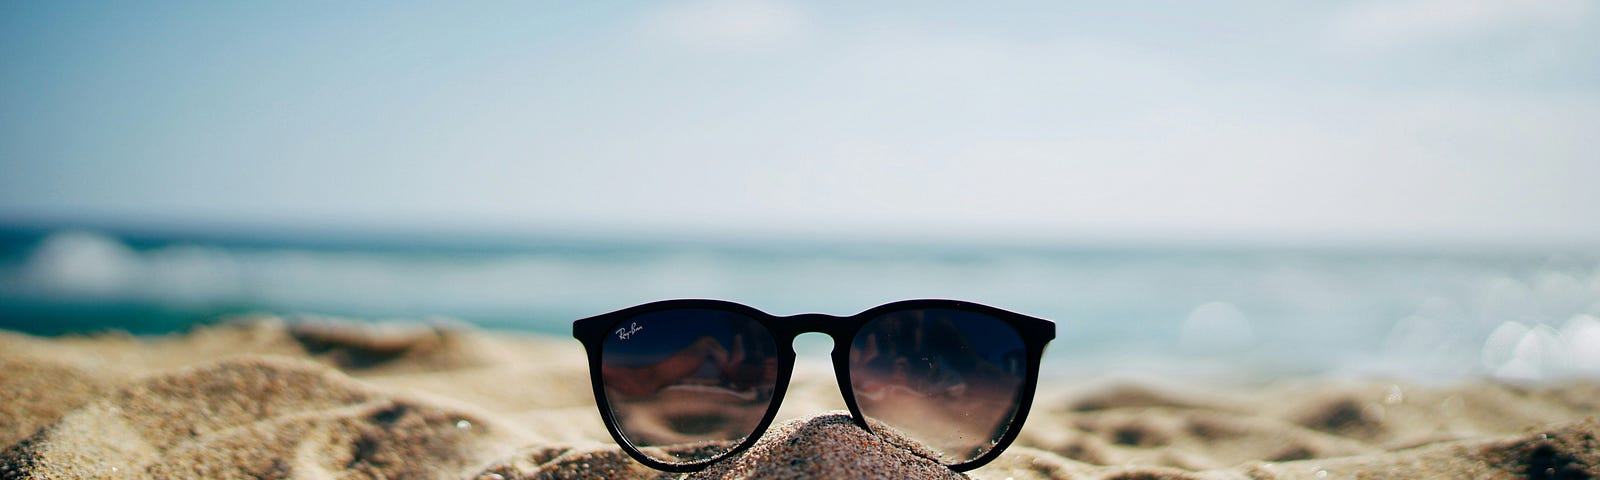 A pair of sunglasses sittin in the sand, sparkling sea, and blue sky behind.